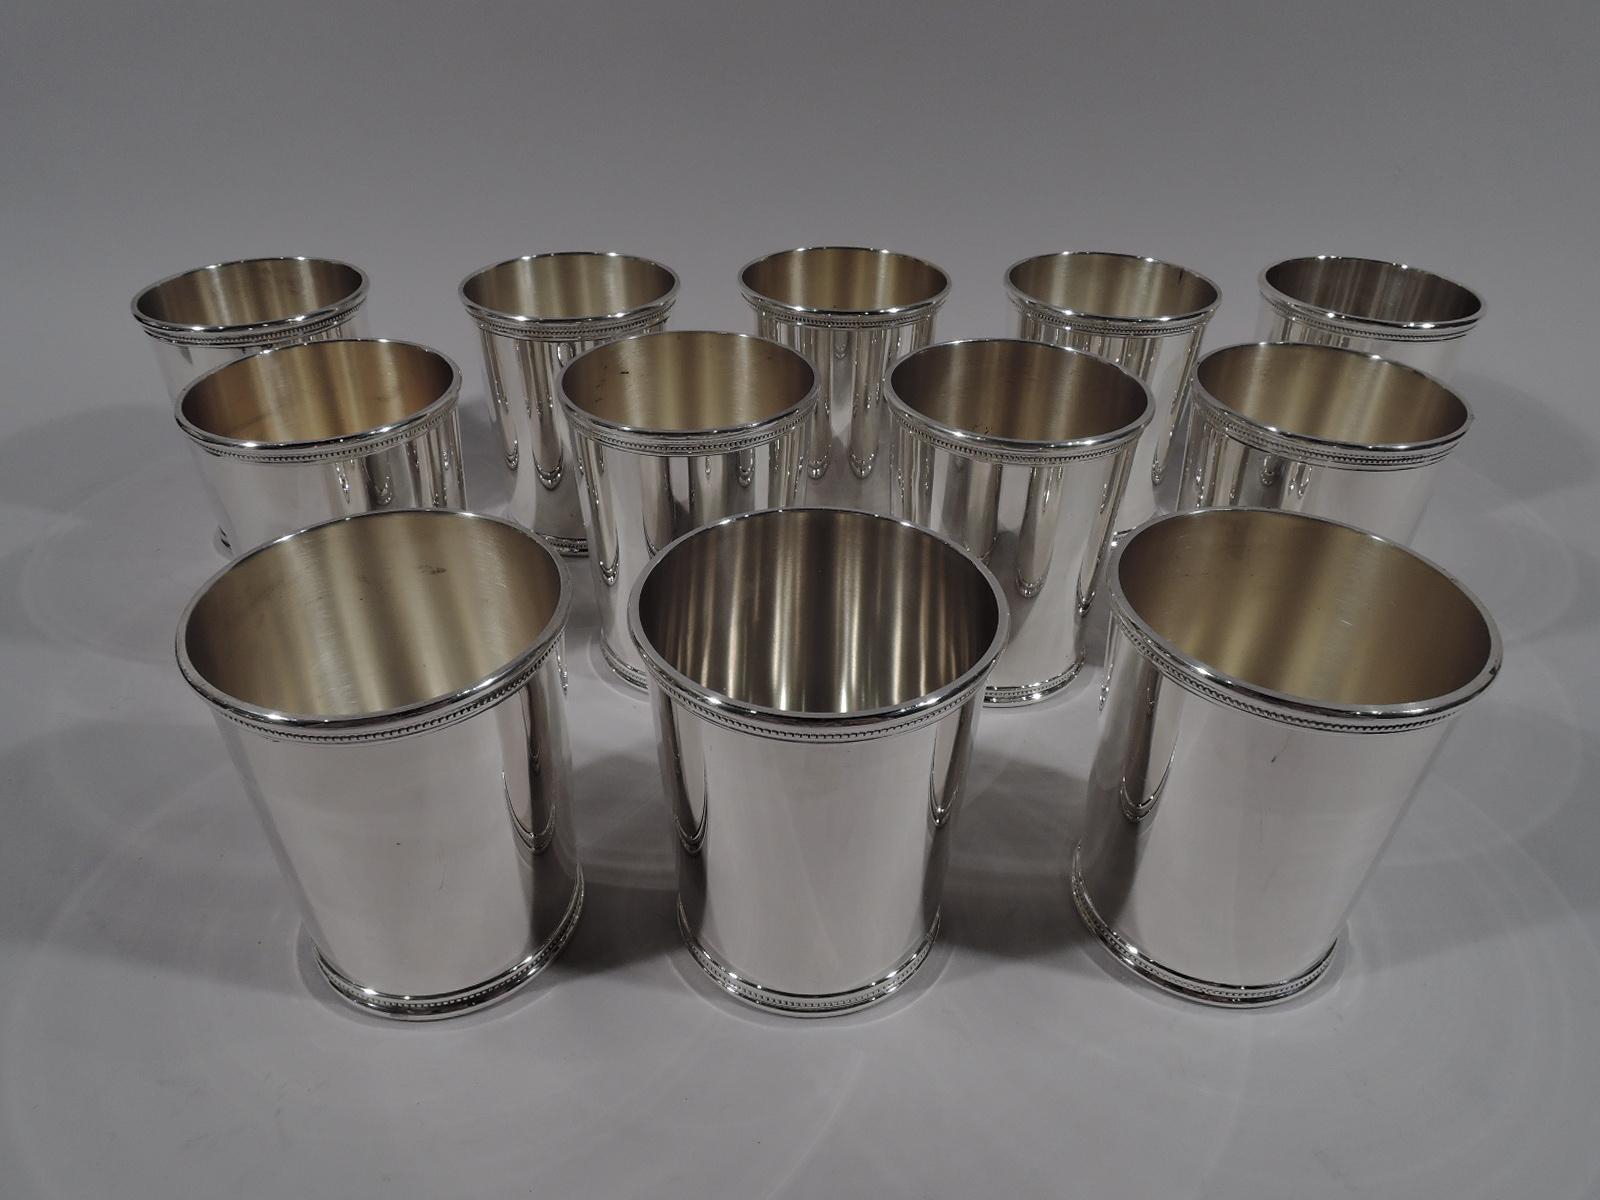 Back to the 1960s with a set of 12 LBJ-era sterling silver mint julep cups. Made by Mark J. Scearce in Shelbyville, Kentucky. Each: Straight and tapering sides with beaded rims. Fully marked including presidential date stamp for Lyndon Baines